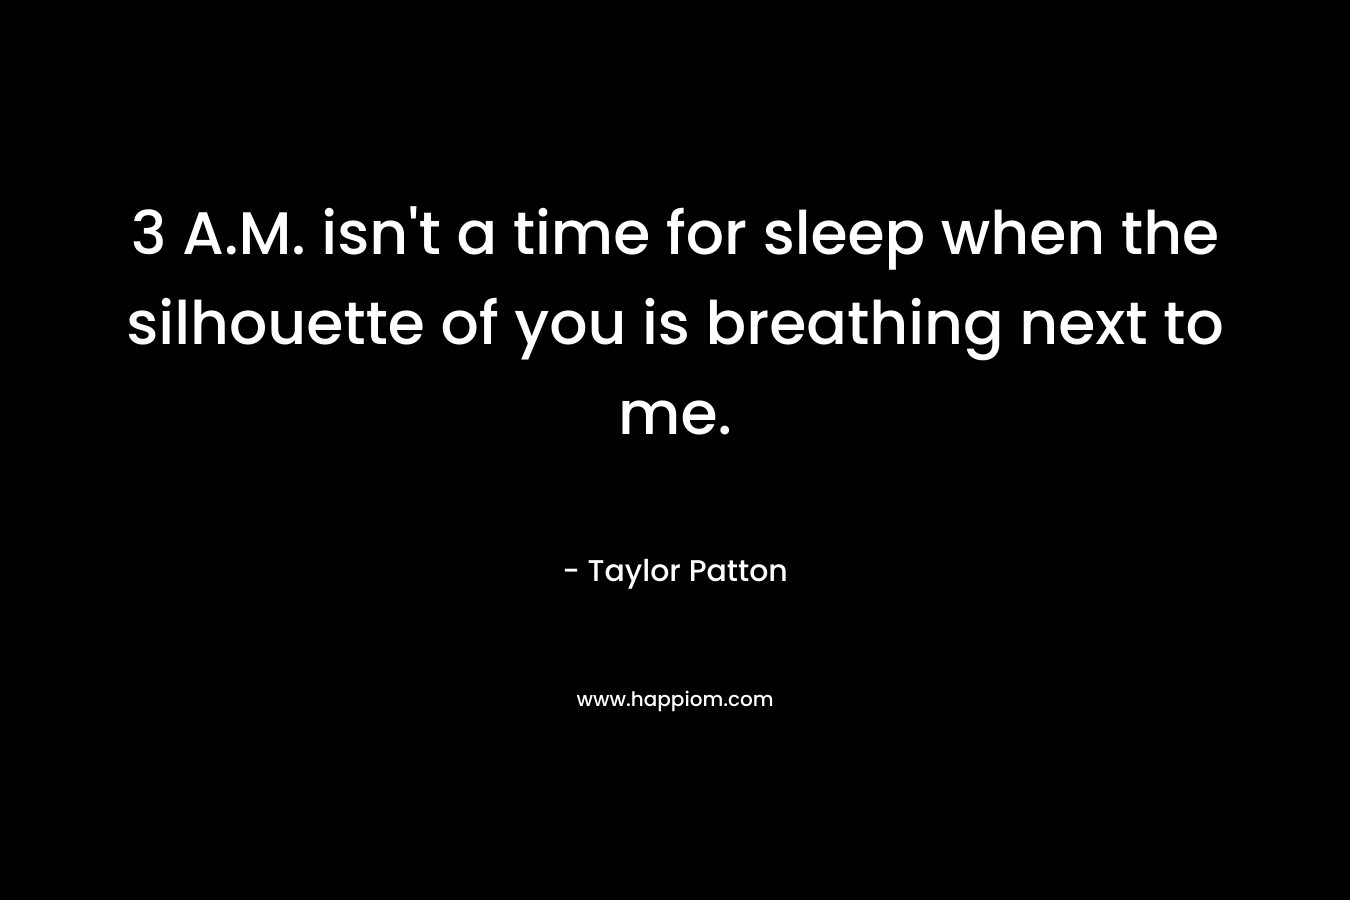 3 A.M. isn’t a time for sleep when the silhouette of you is breathing next to me. – Taylor Patton